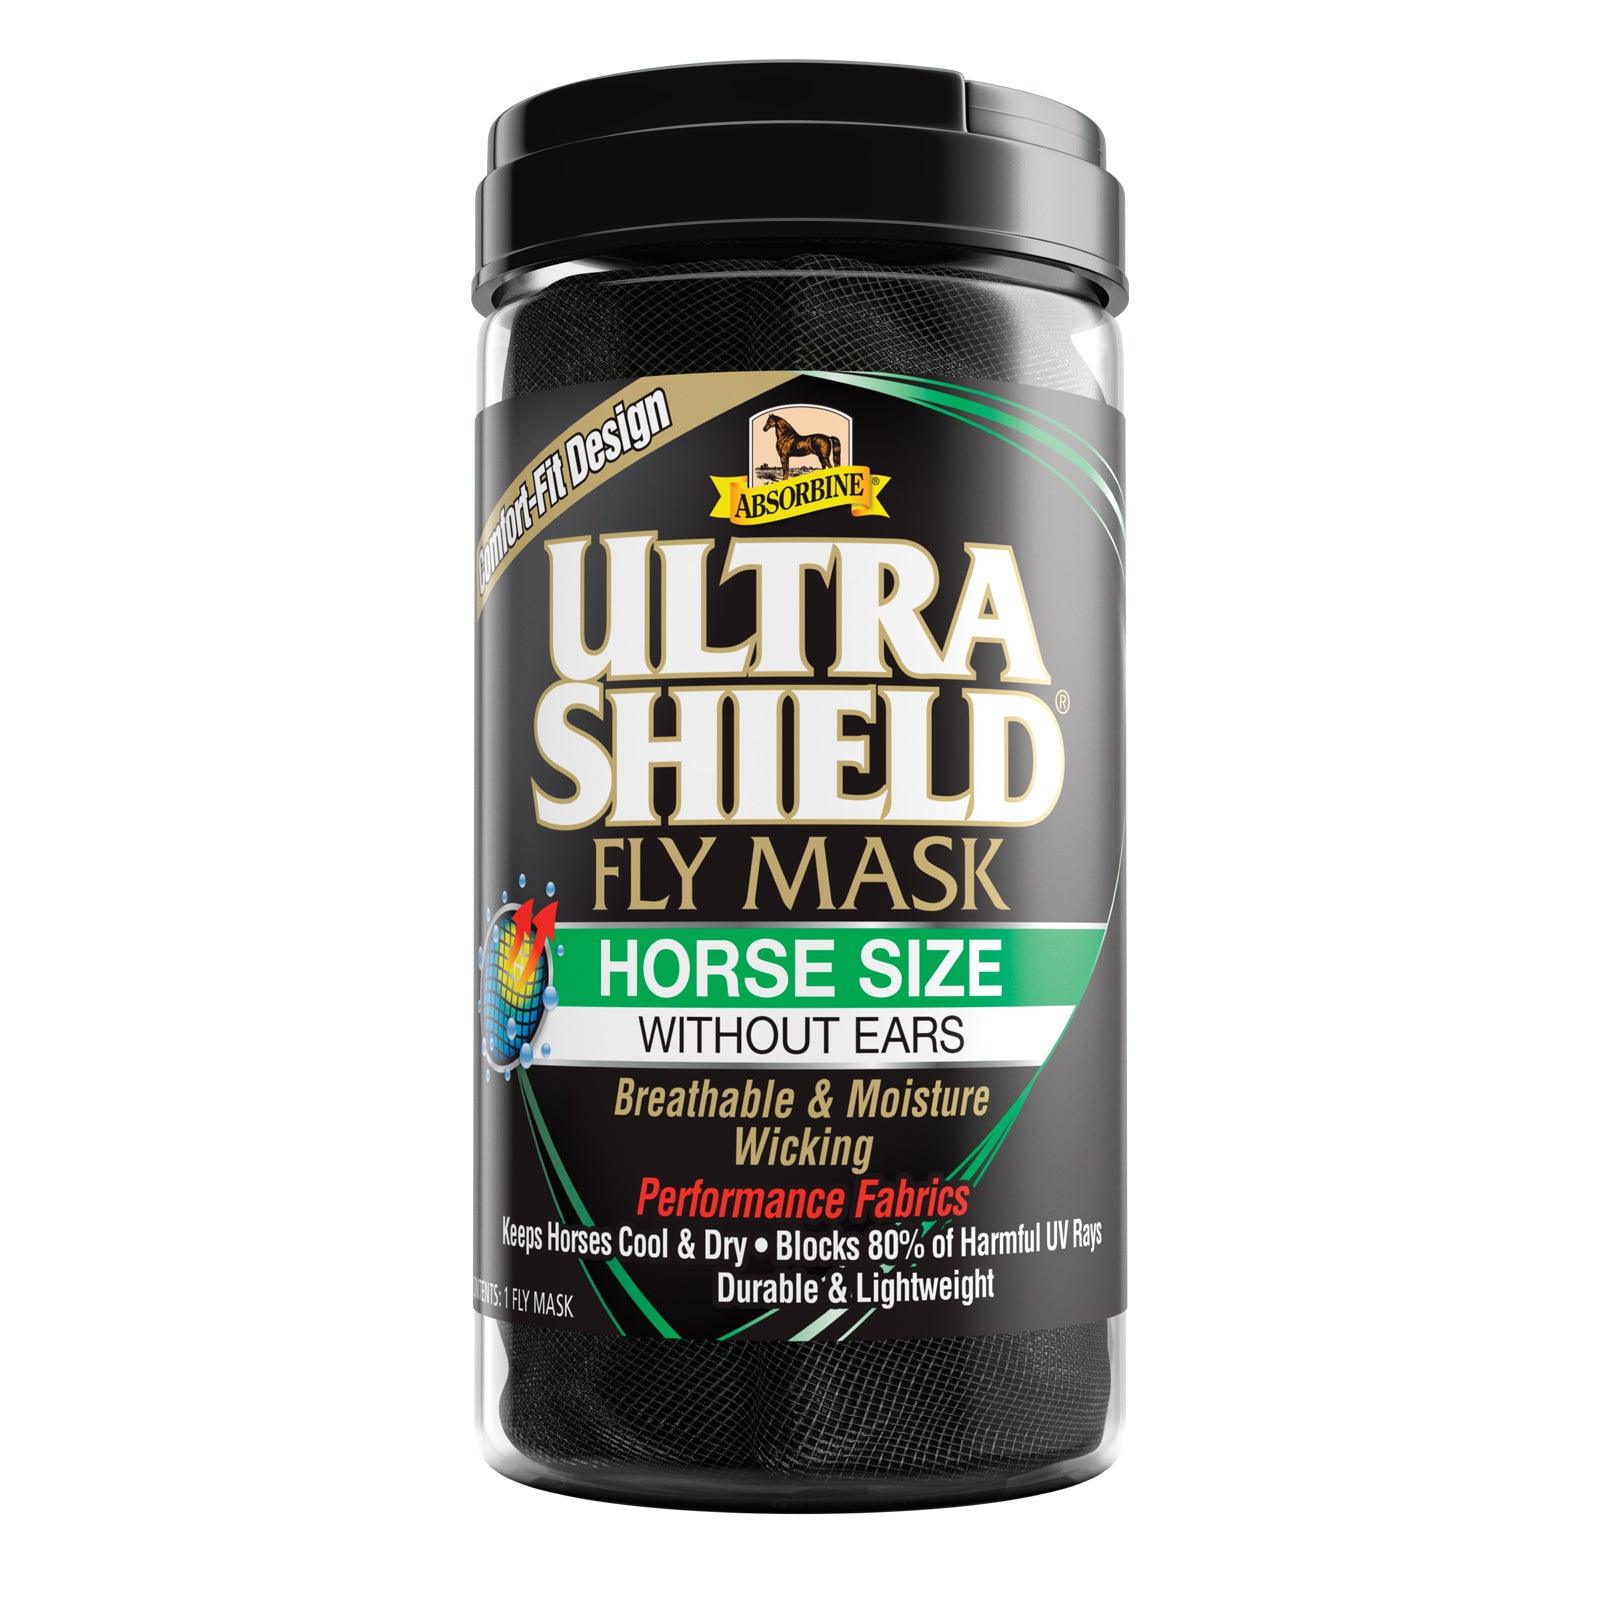 UltraShield® Fly Mask Fly Control absorbine Horse No Ear Coverage 